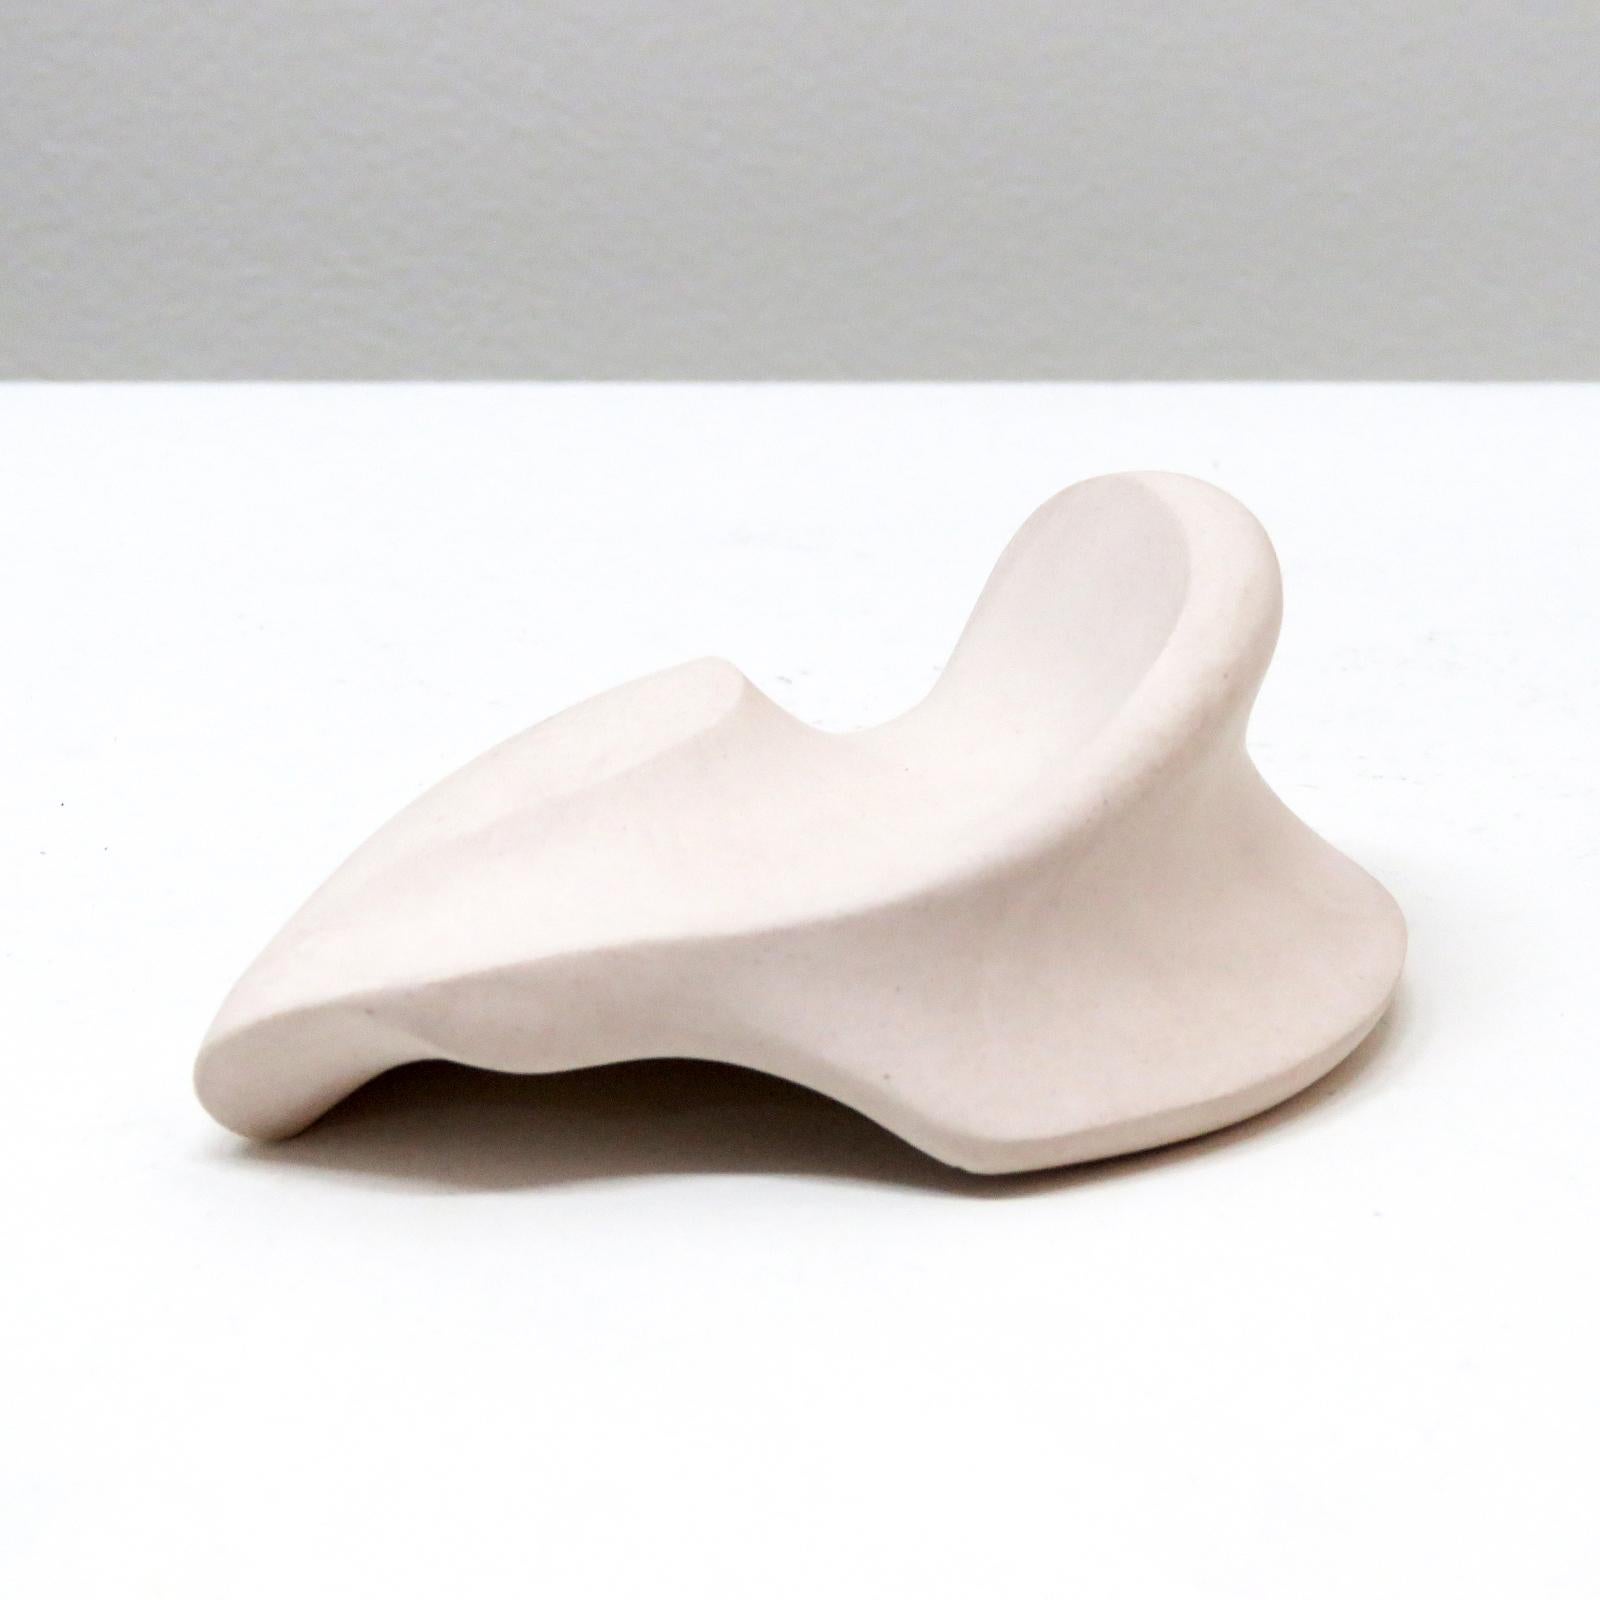 stunning palm stone titled 'ear', handcrafted by Los Angeles based ceramicist Jed Farlow. A one-of-a-kind unglazed porcelain sculpture, part of an ongoing 'Bone' series. Each of these unique pieces is meticulously crafted and meant to be hand held,